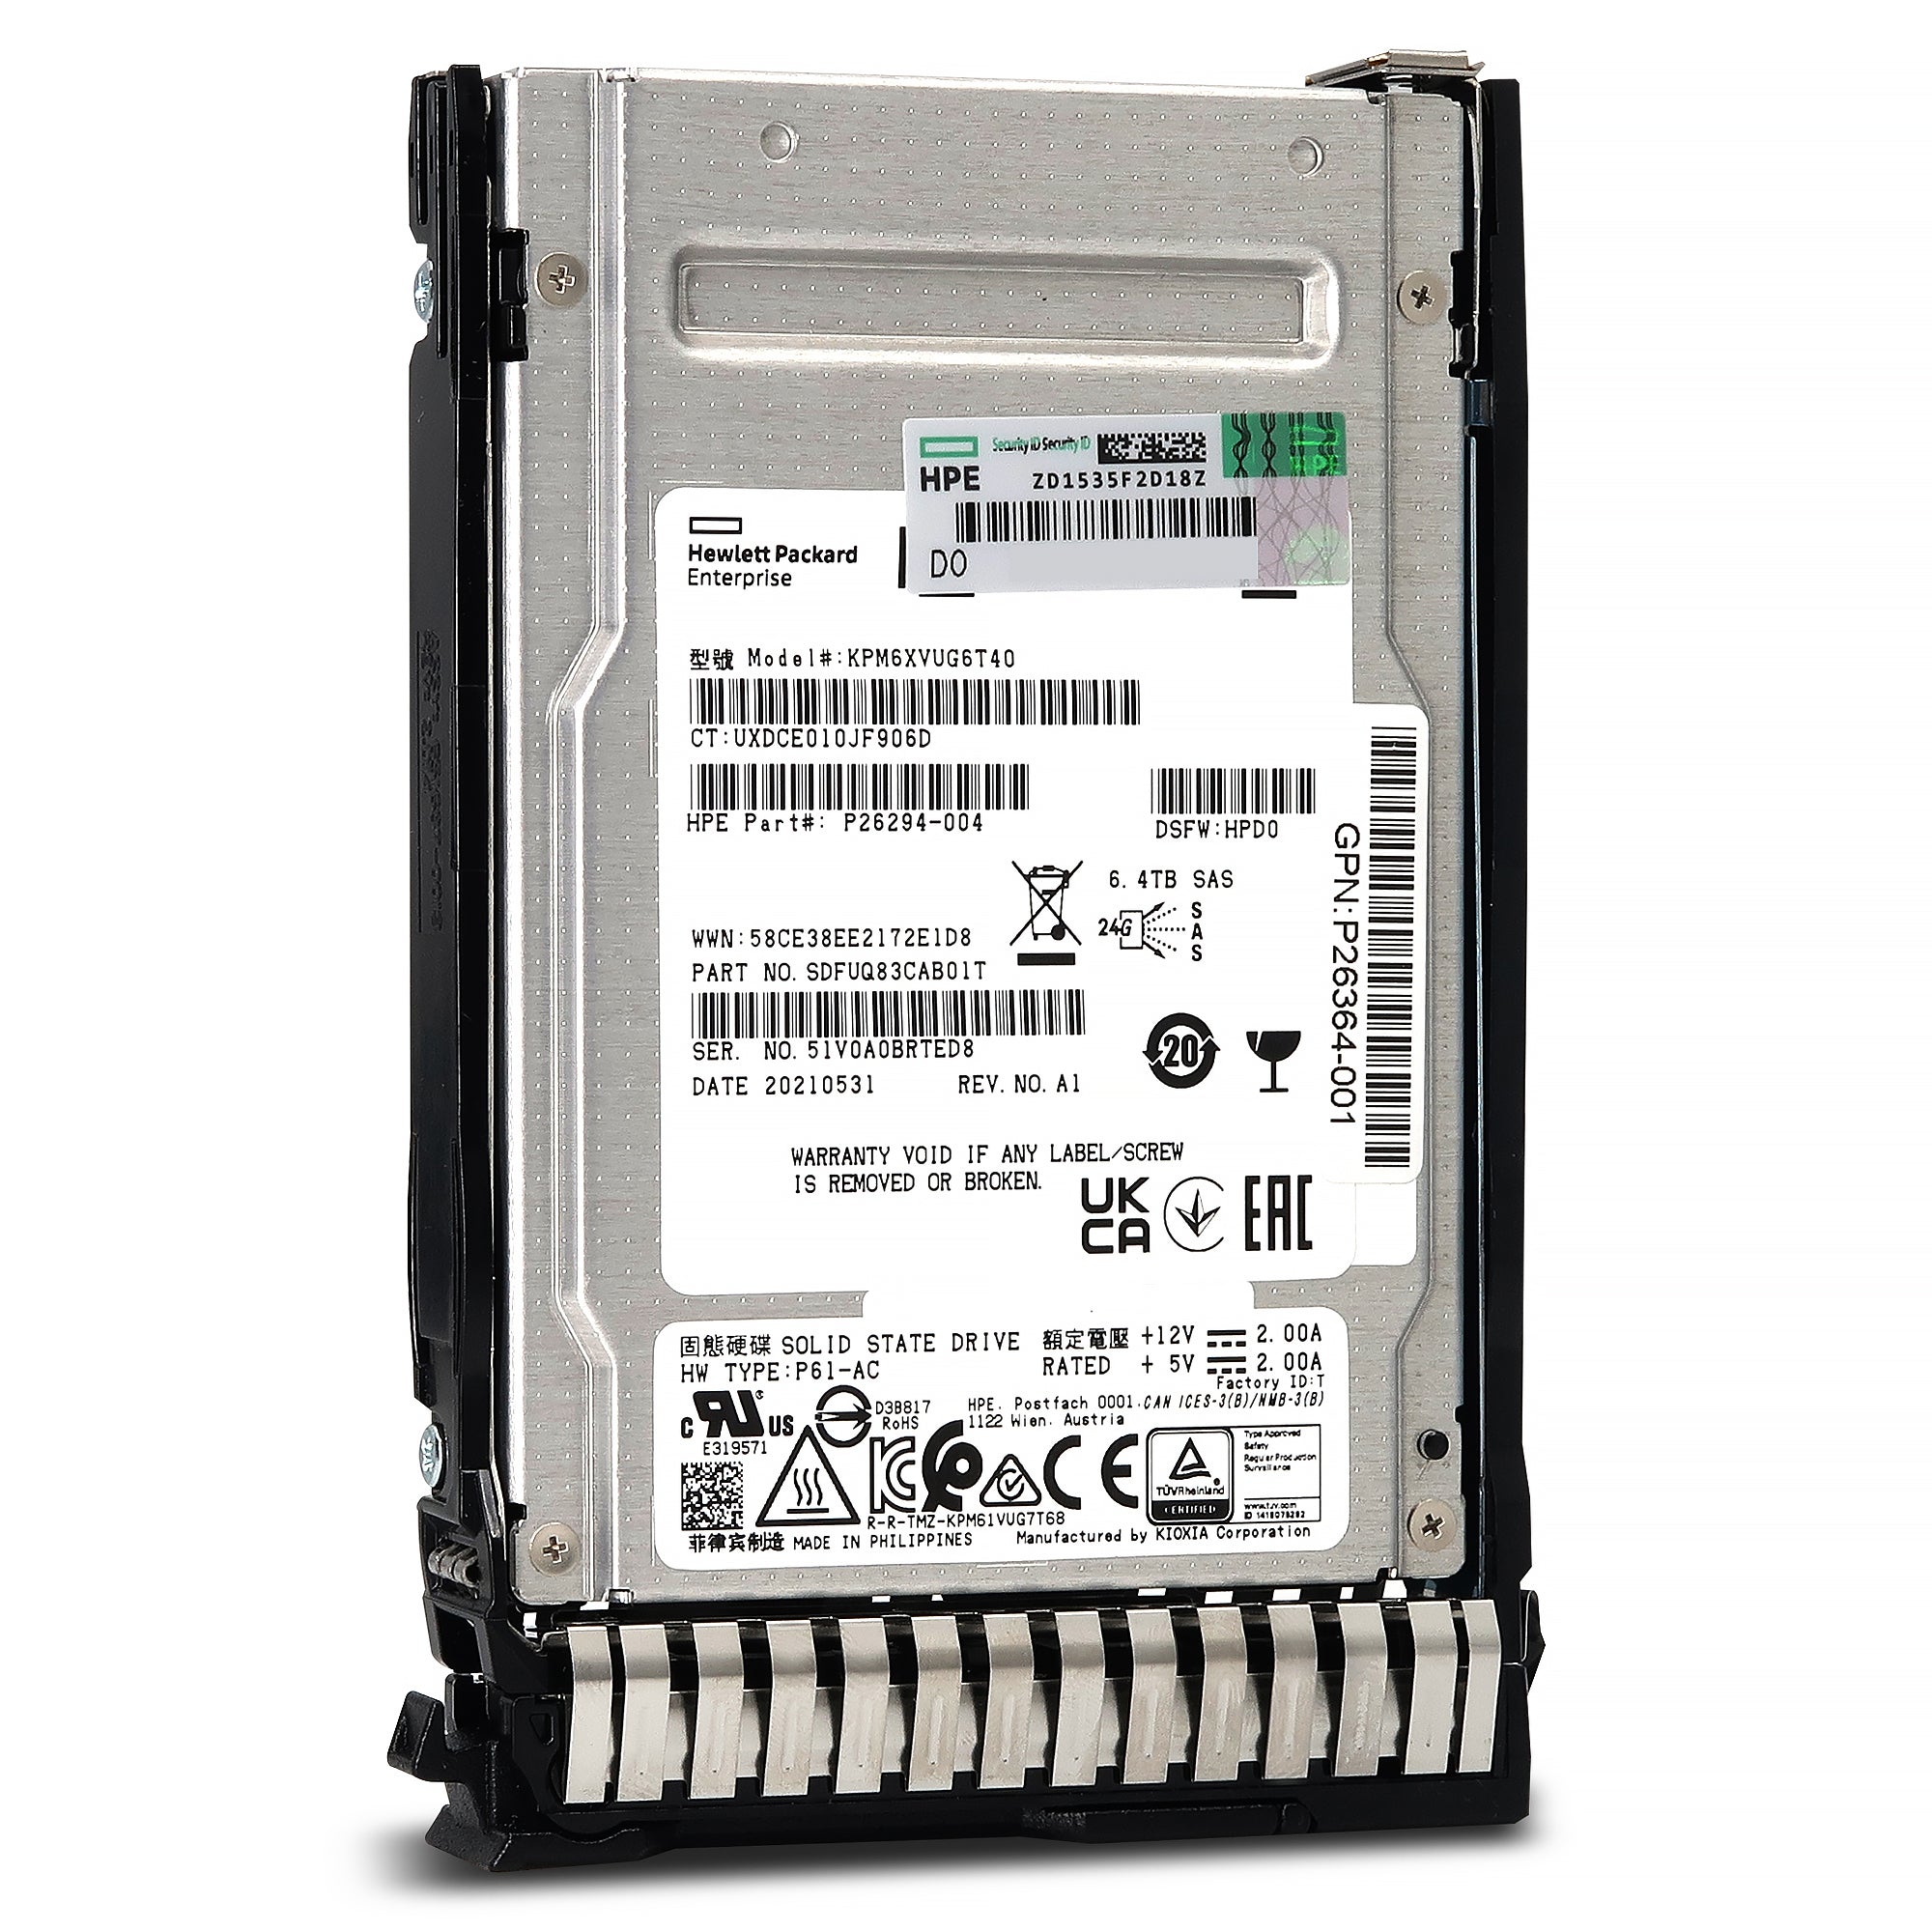 HPE PM6-V P40479-B21 KPM6XVUG6T40 6.4TB SAS 22.5Gb/s 3D TLC SIE 2.5in Recertified Solid State Drive - Front View